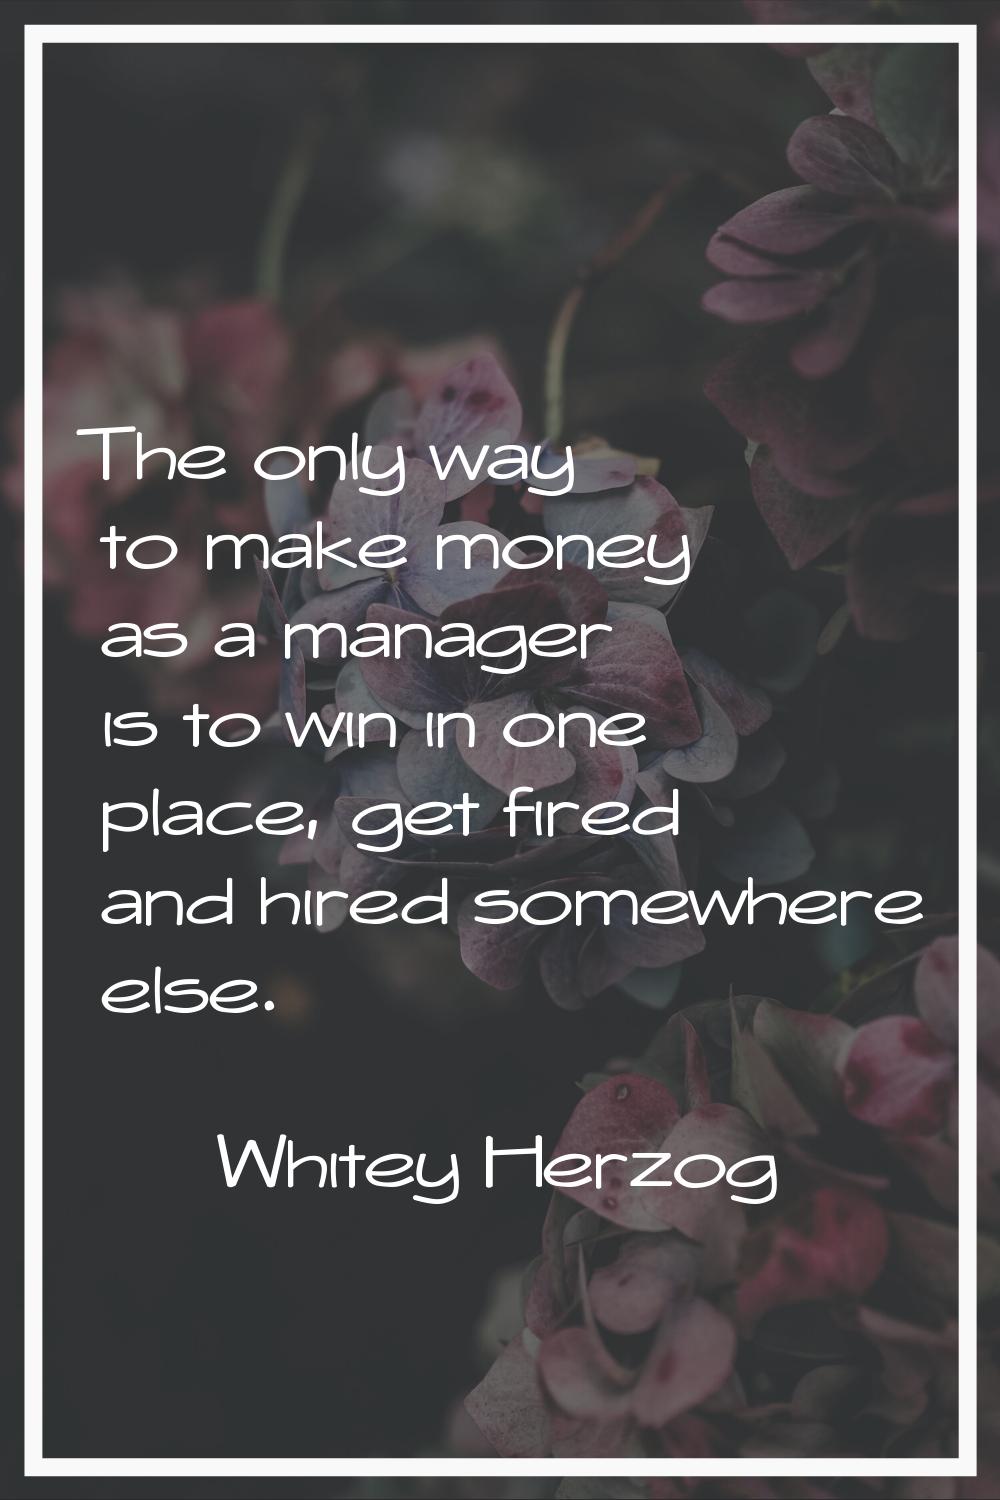 The only way to make money as a manager is to win in one place, get fired and hired somewhere else.